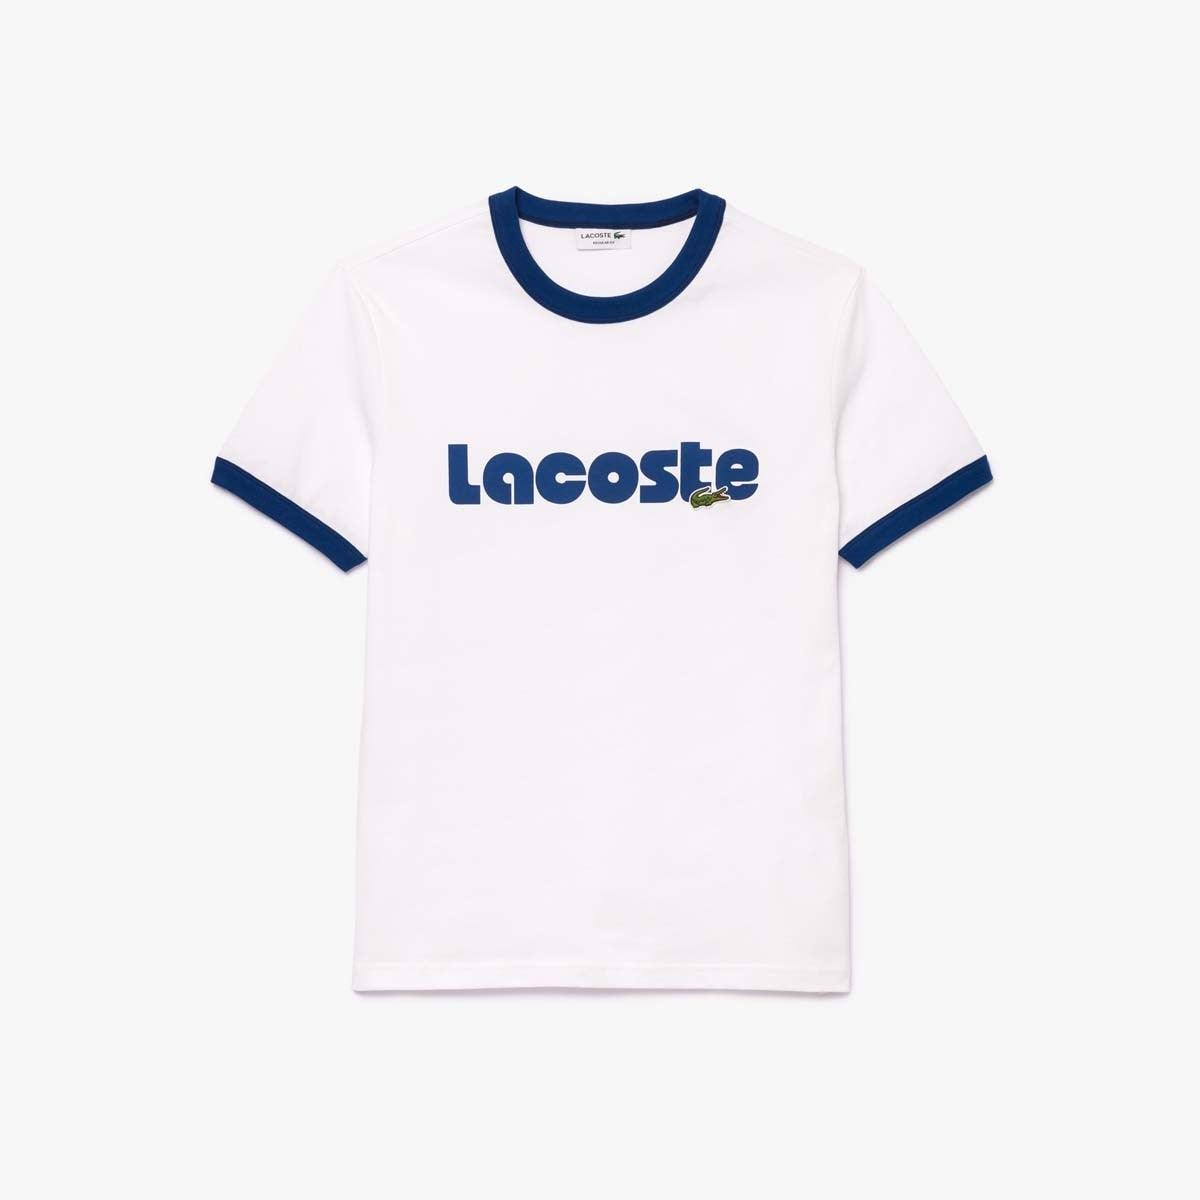 Lacoste Men's Printed Contrast Accent T-shirt White/Globe TH753151 F2F